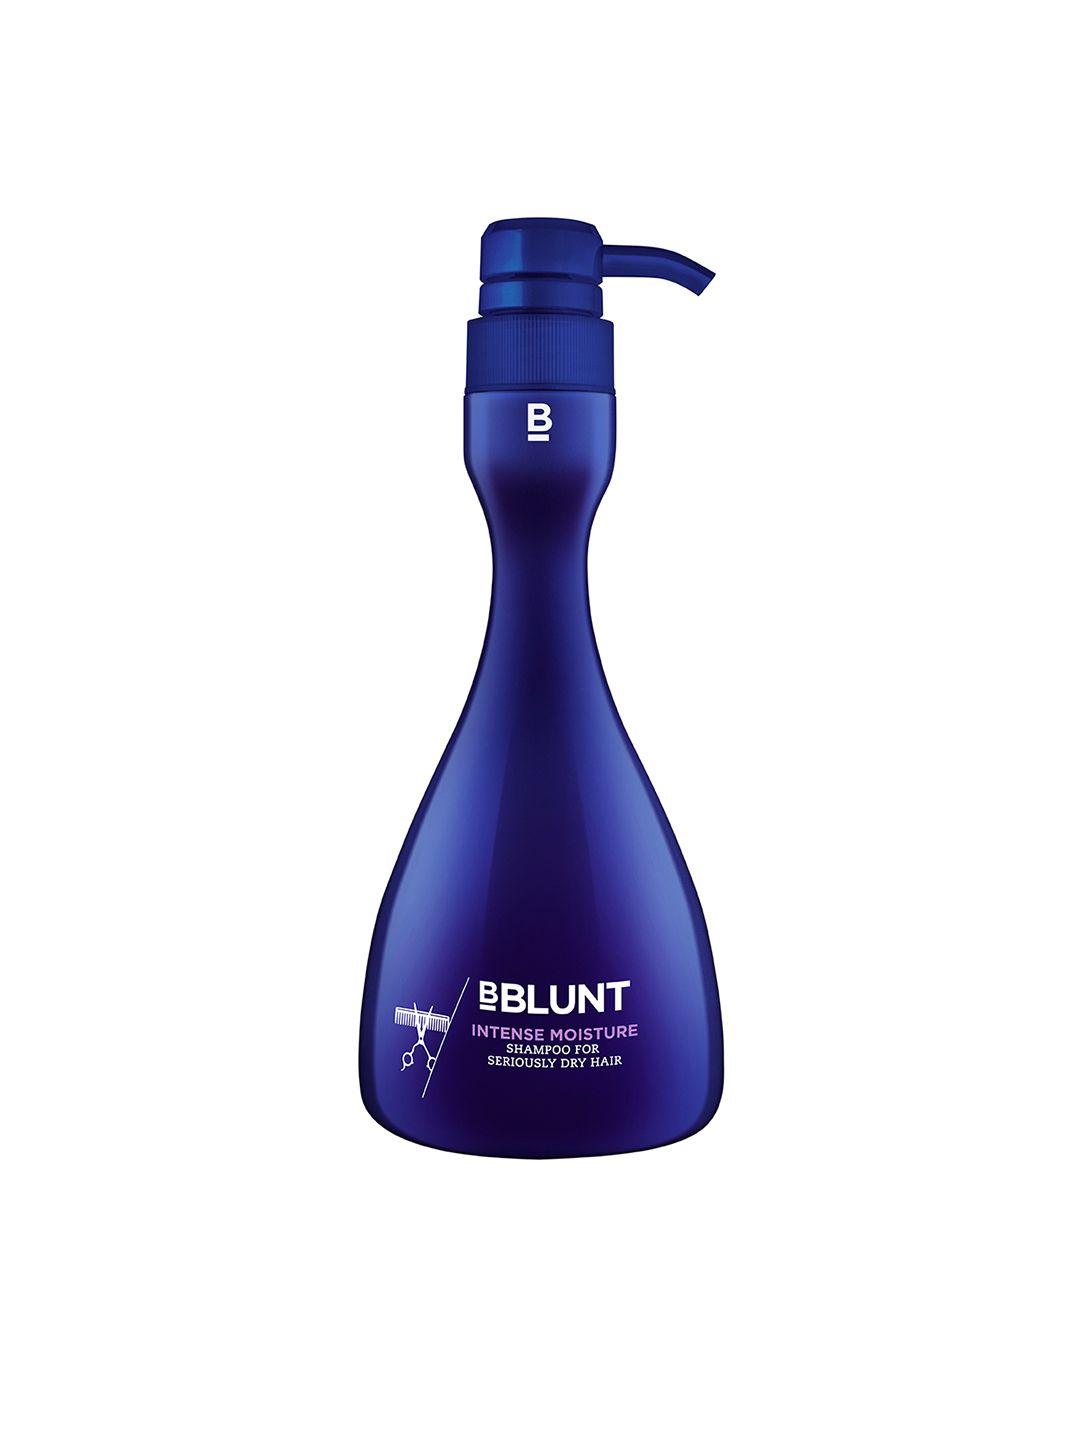 bblunt intense moisture shampoo for seriously dry hair 400 ml